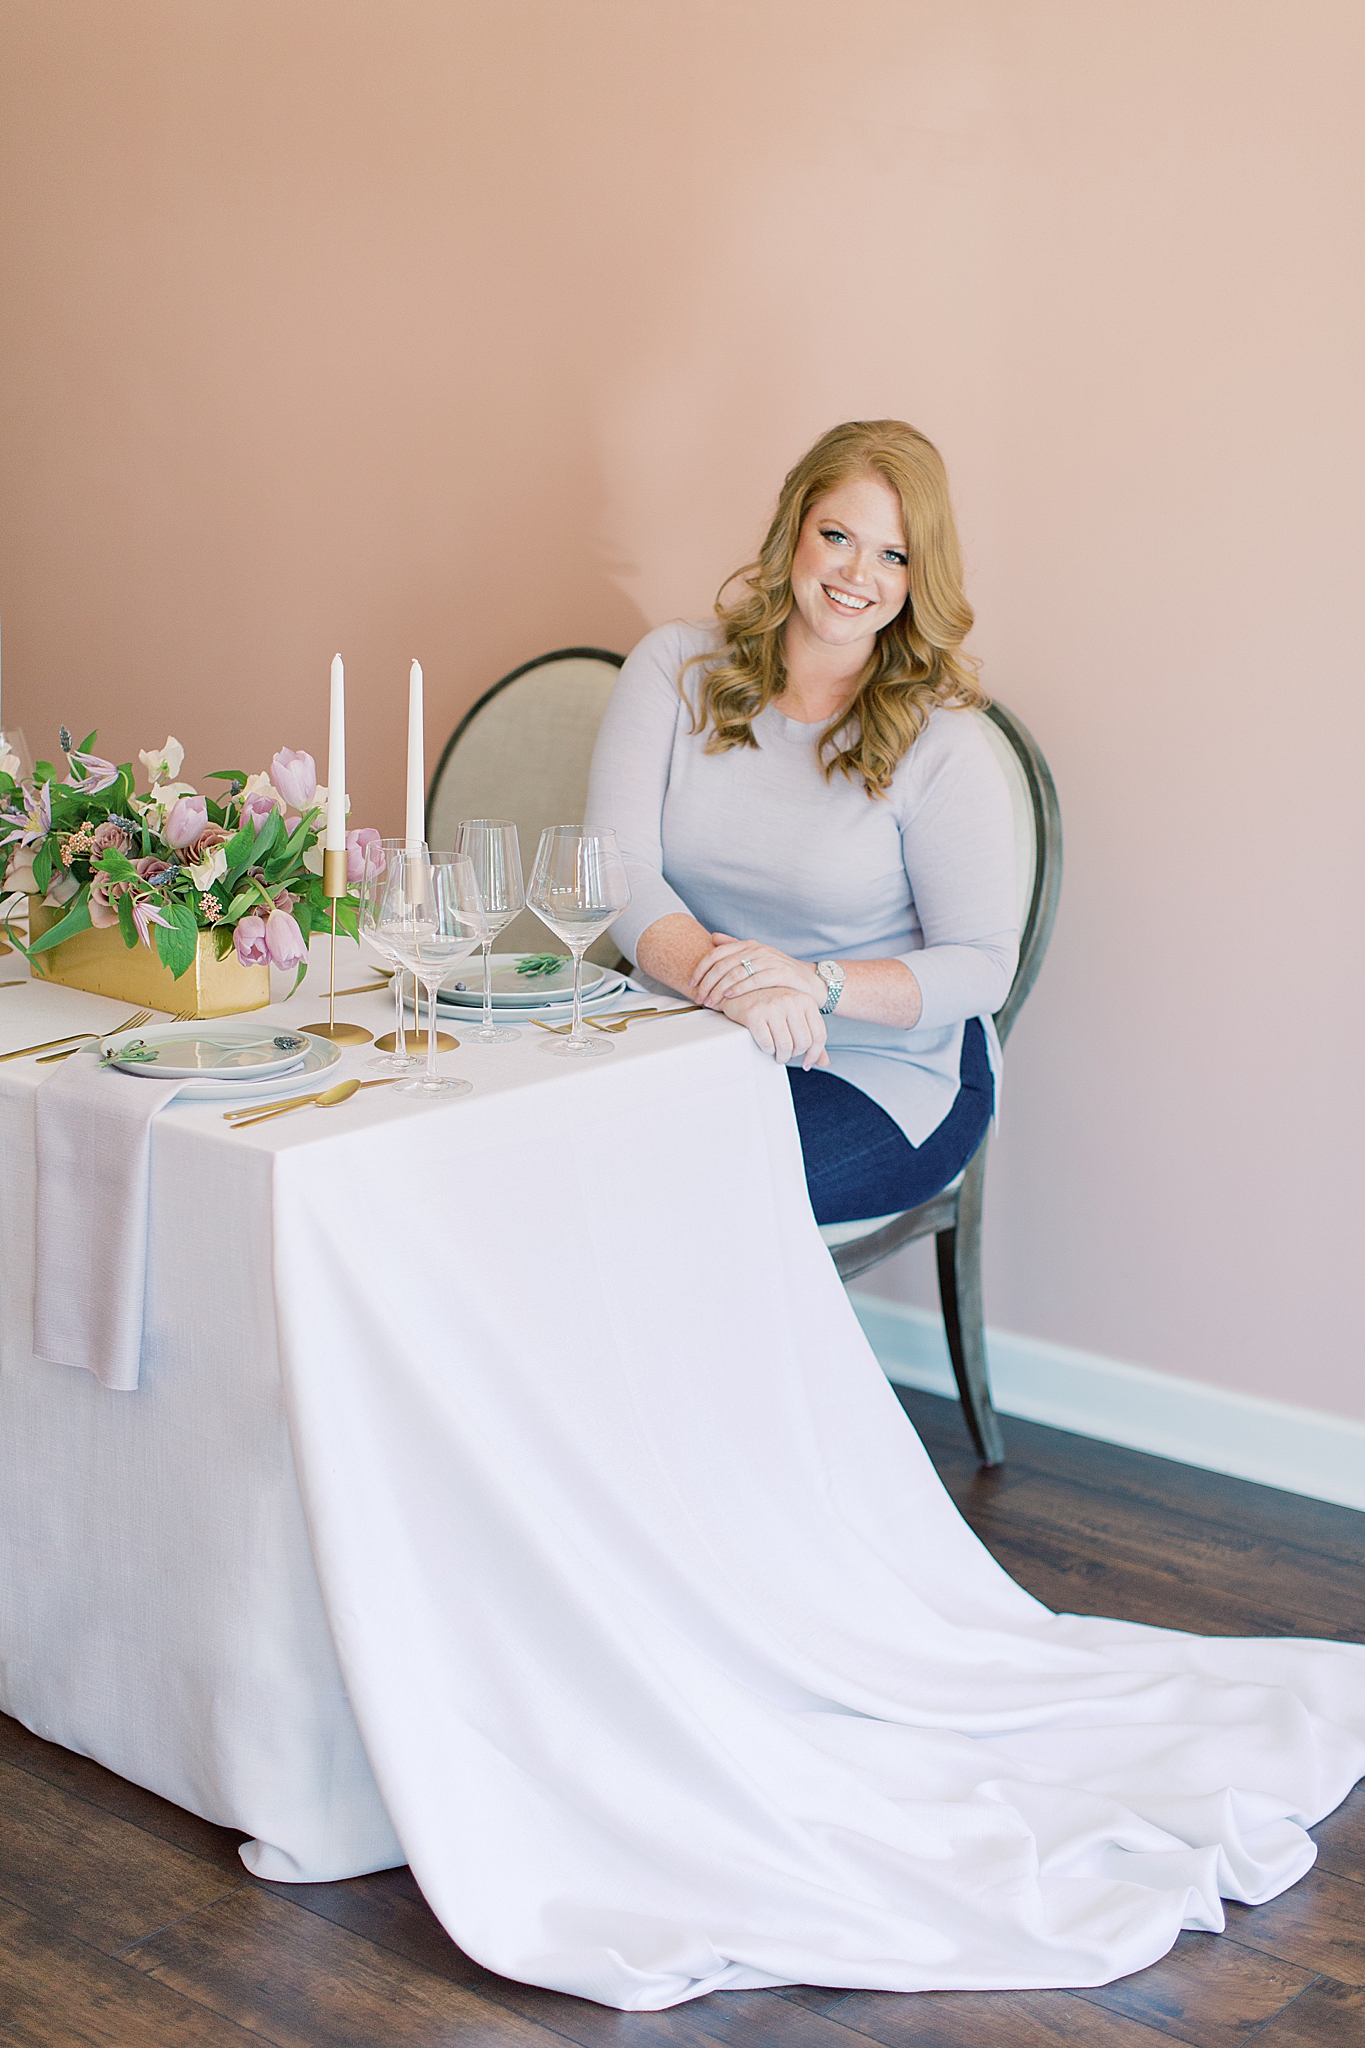 wedding planner sits at table during branding photos with Charlotte branding photographer Demi Mabry